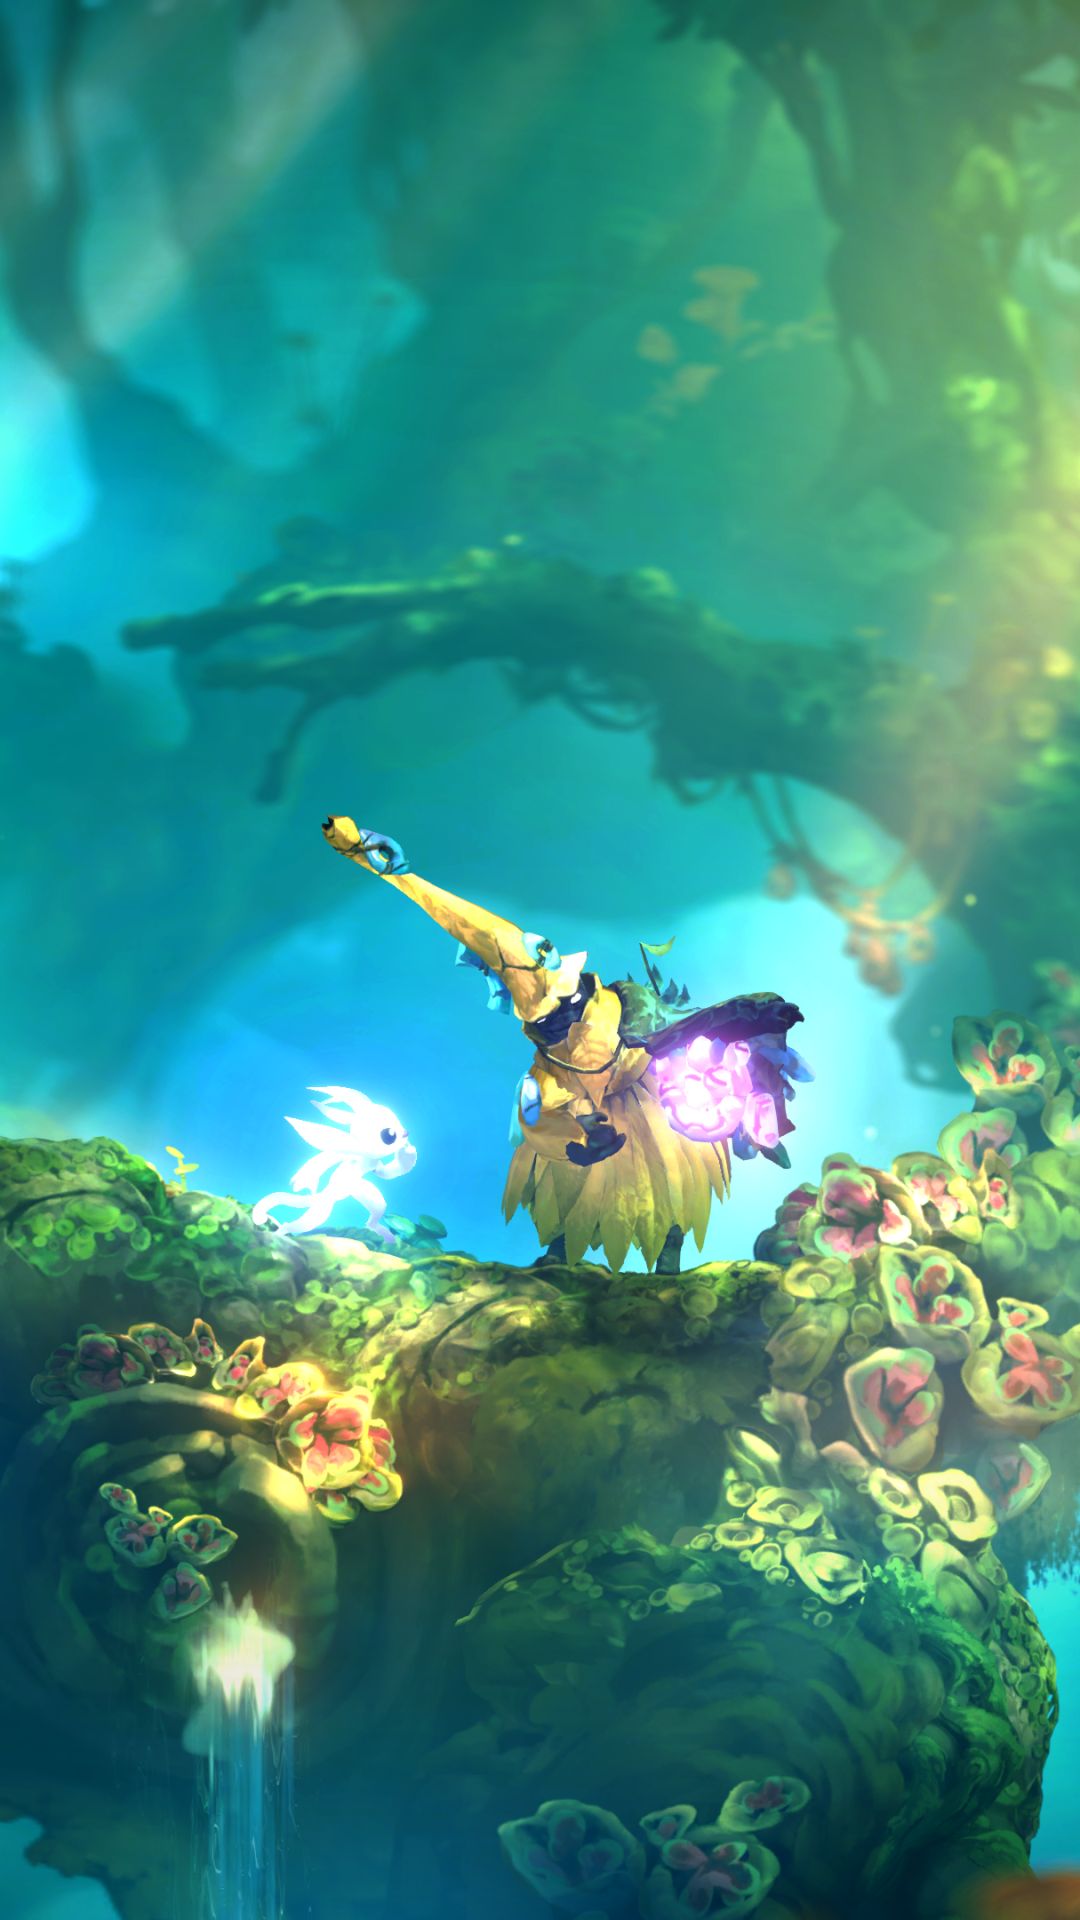 ori and the will of the wisps, video game HD wallpaper